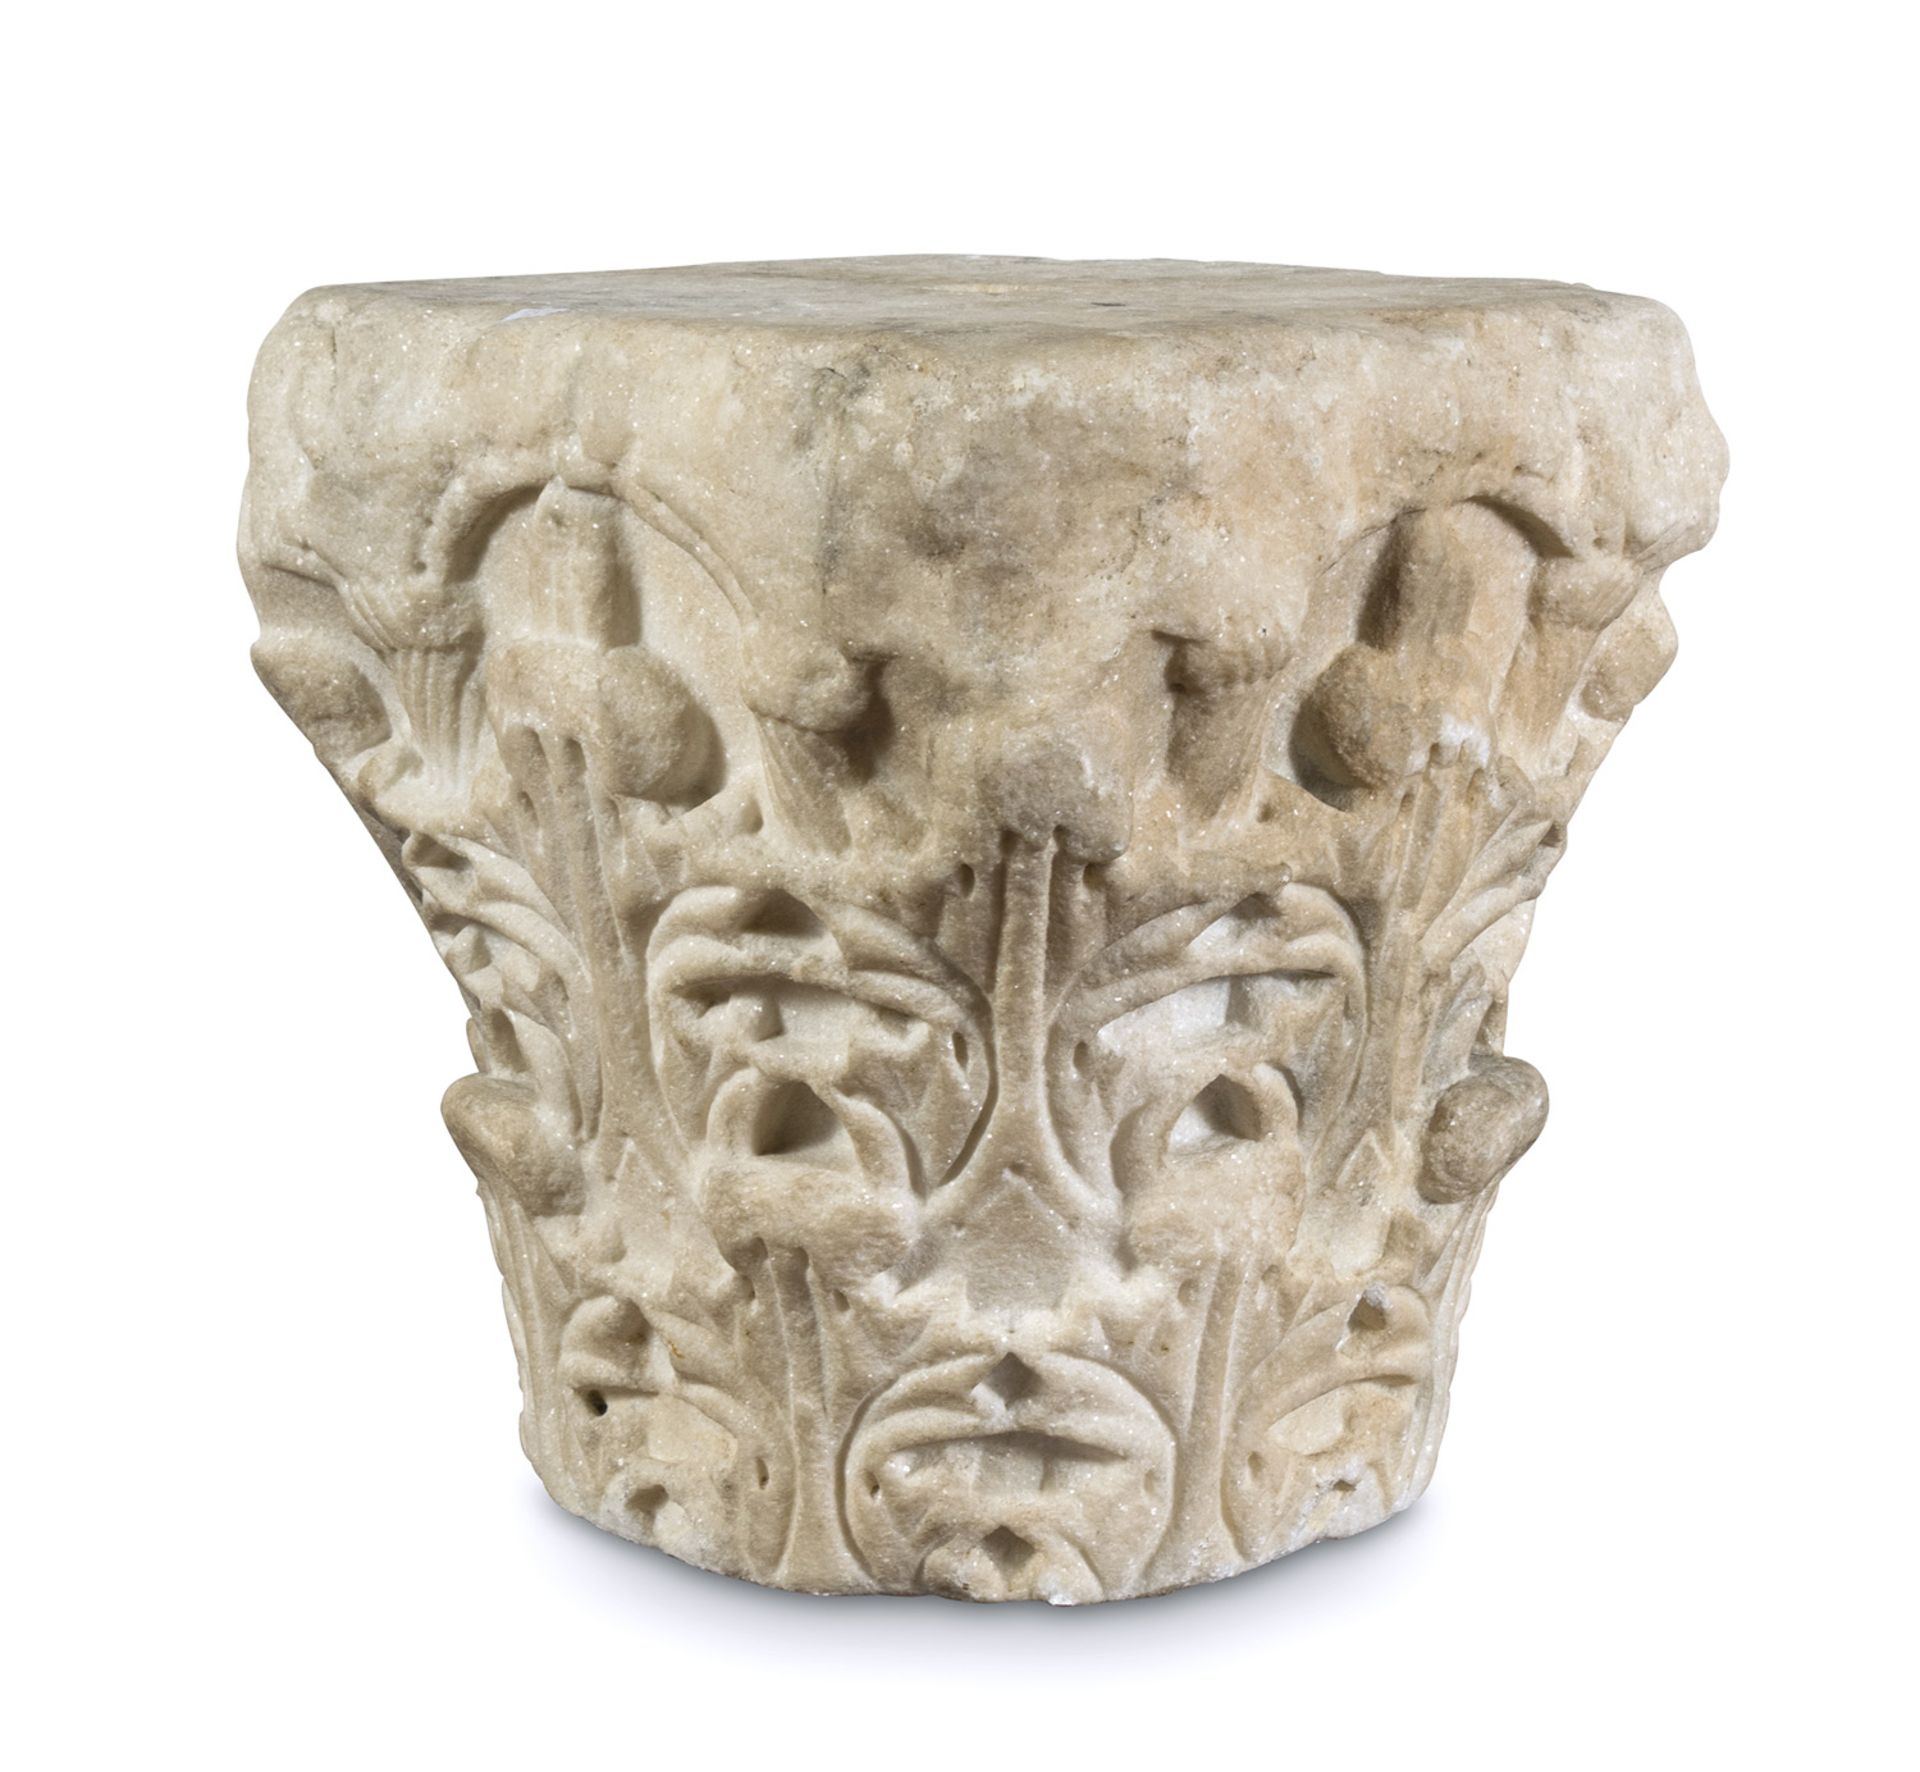 CORINTHIAN CAPITAL IN WHITE STATUARY MARBLE, ROME 4TH CENTURY A.C. with leaf crowns. Example of